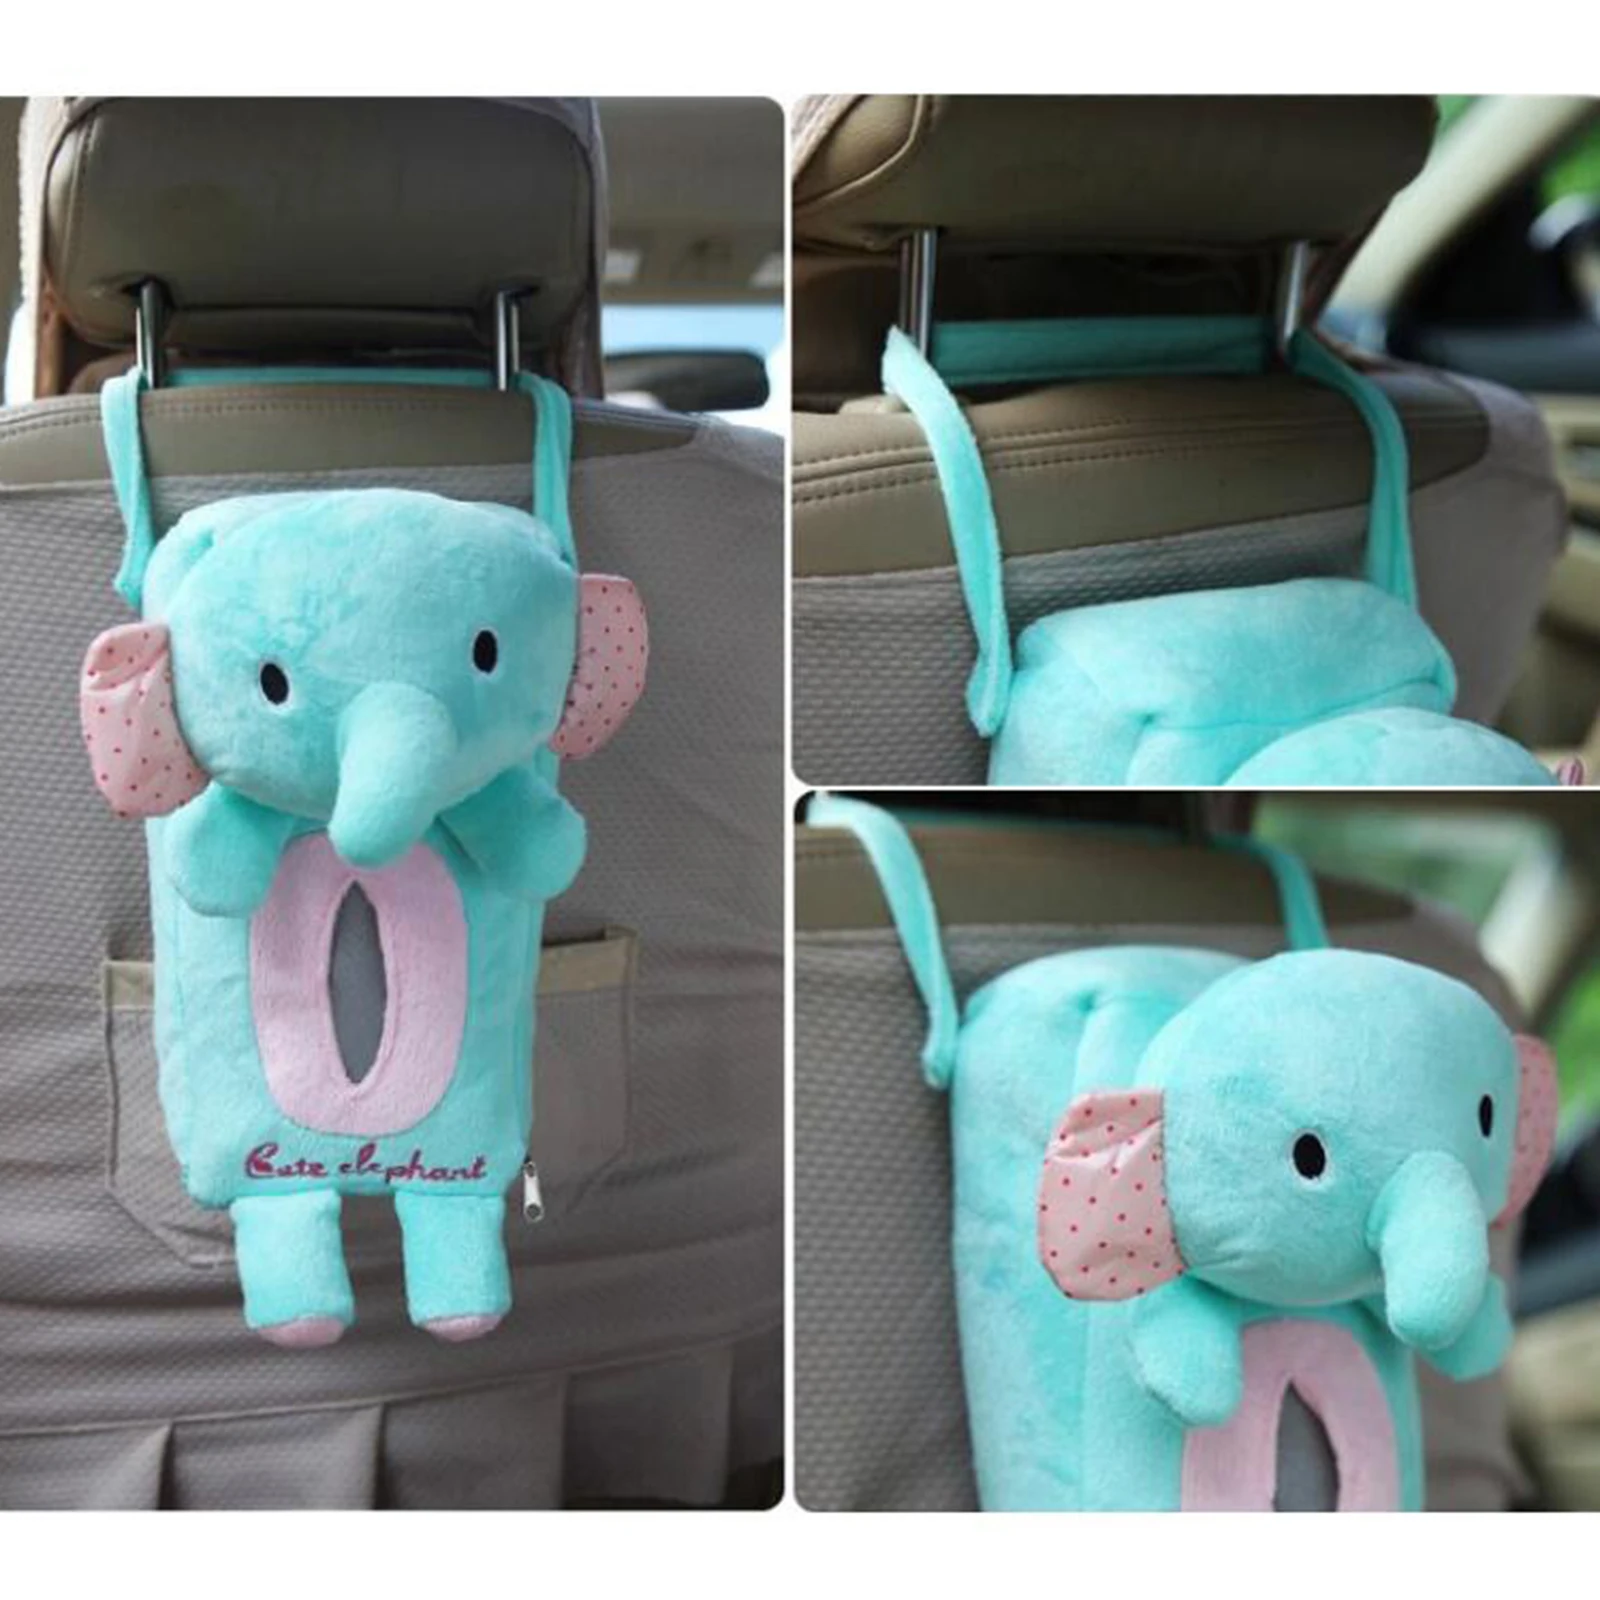 Lovely Cute Rabbit Bear Elephant Panda Home Office Car Auto Automobile Tissue Boxes Cover Napkin Paper Towel Holders Cases